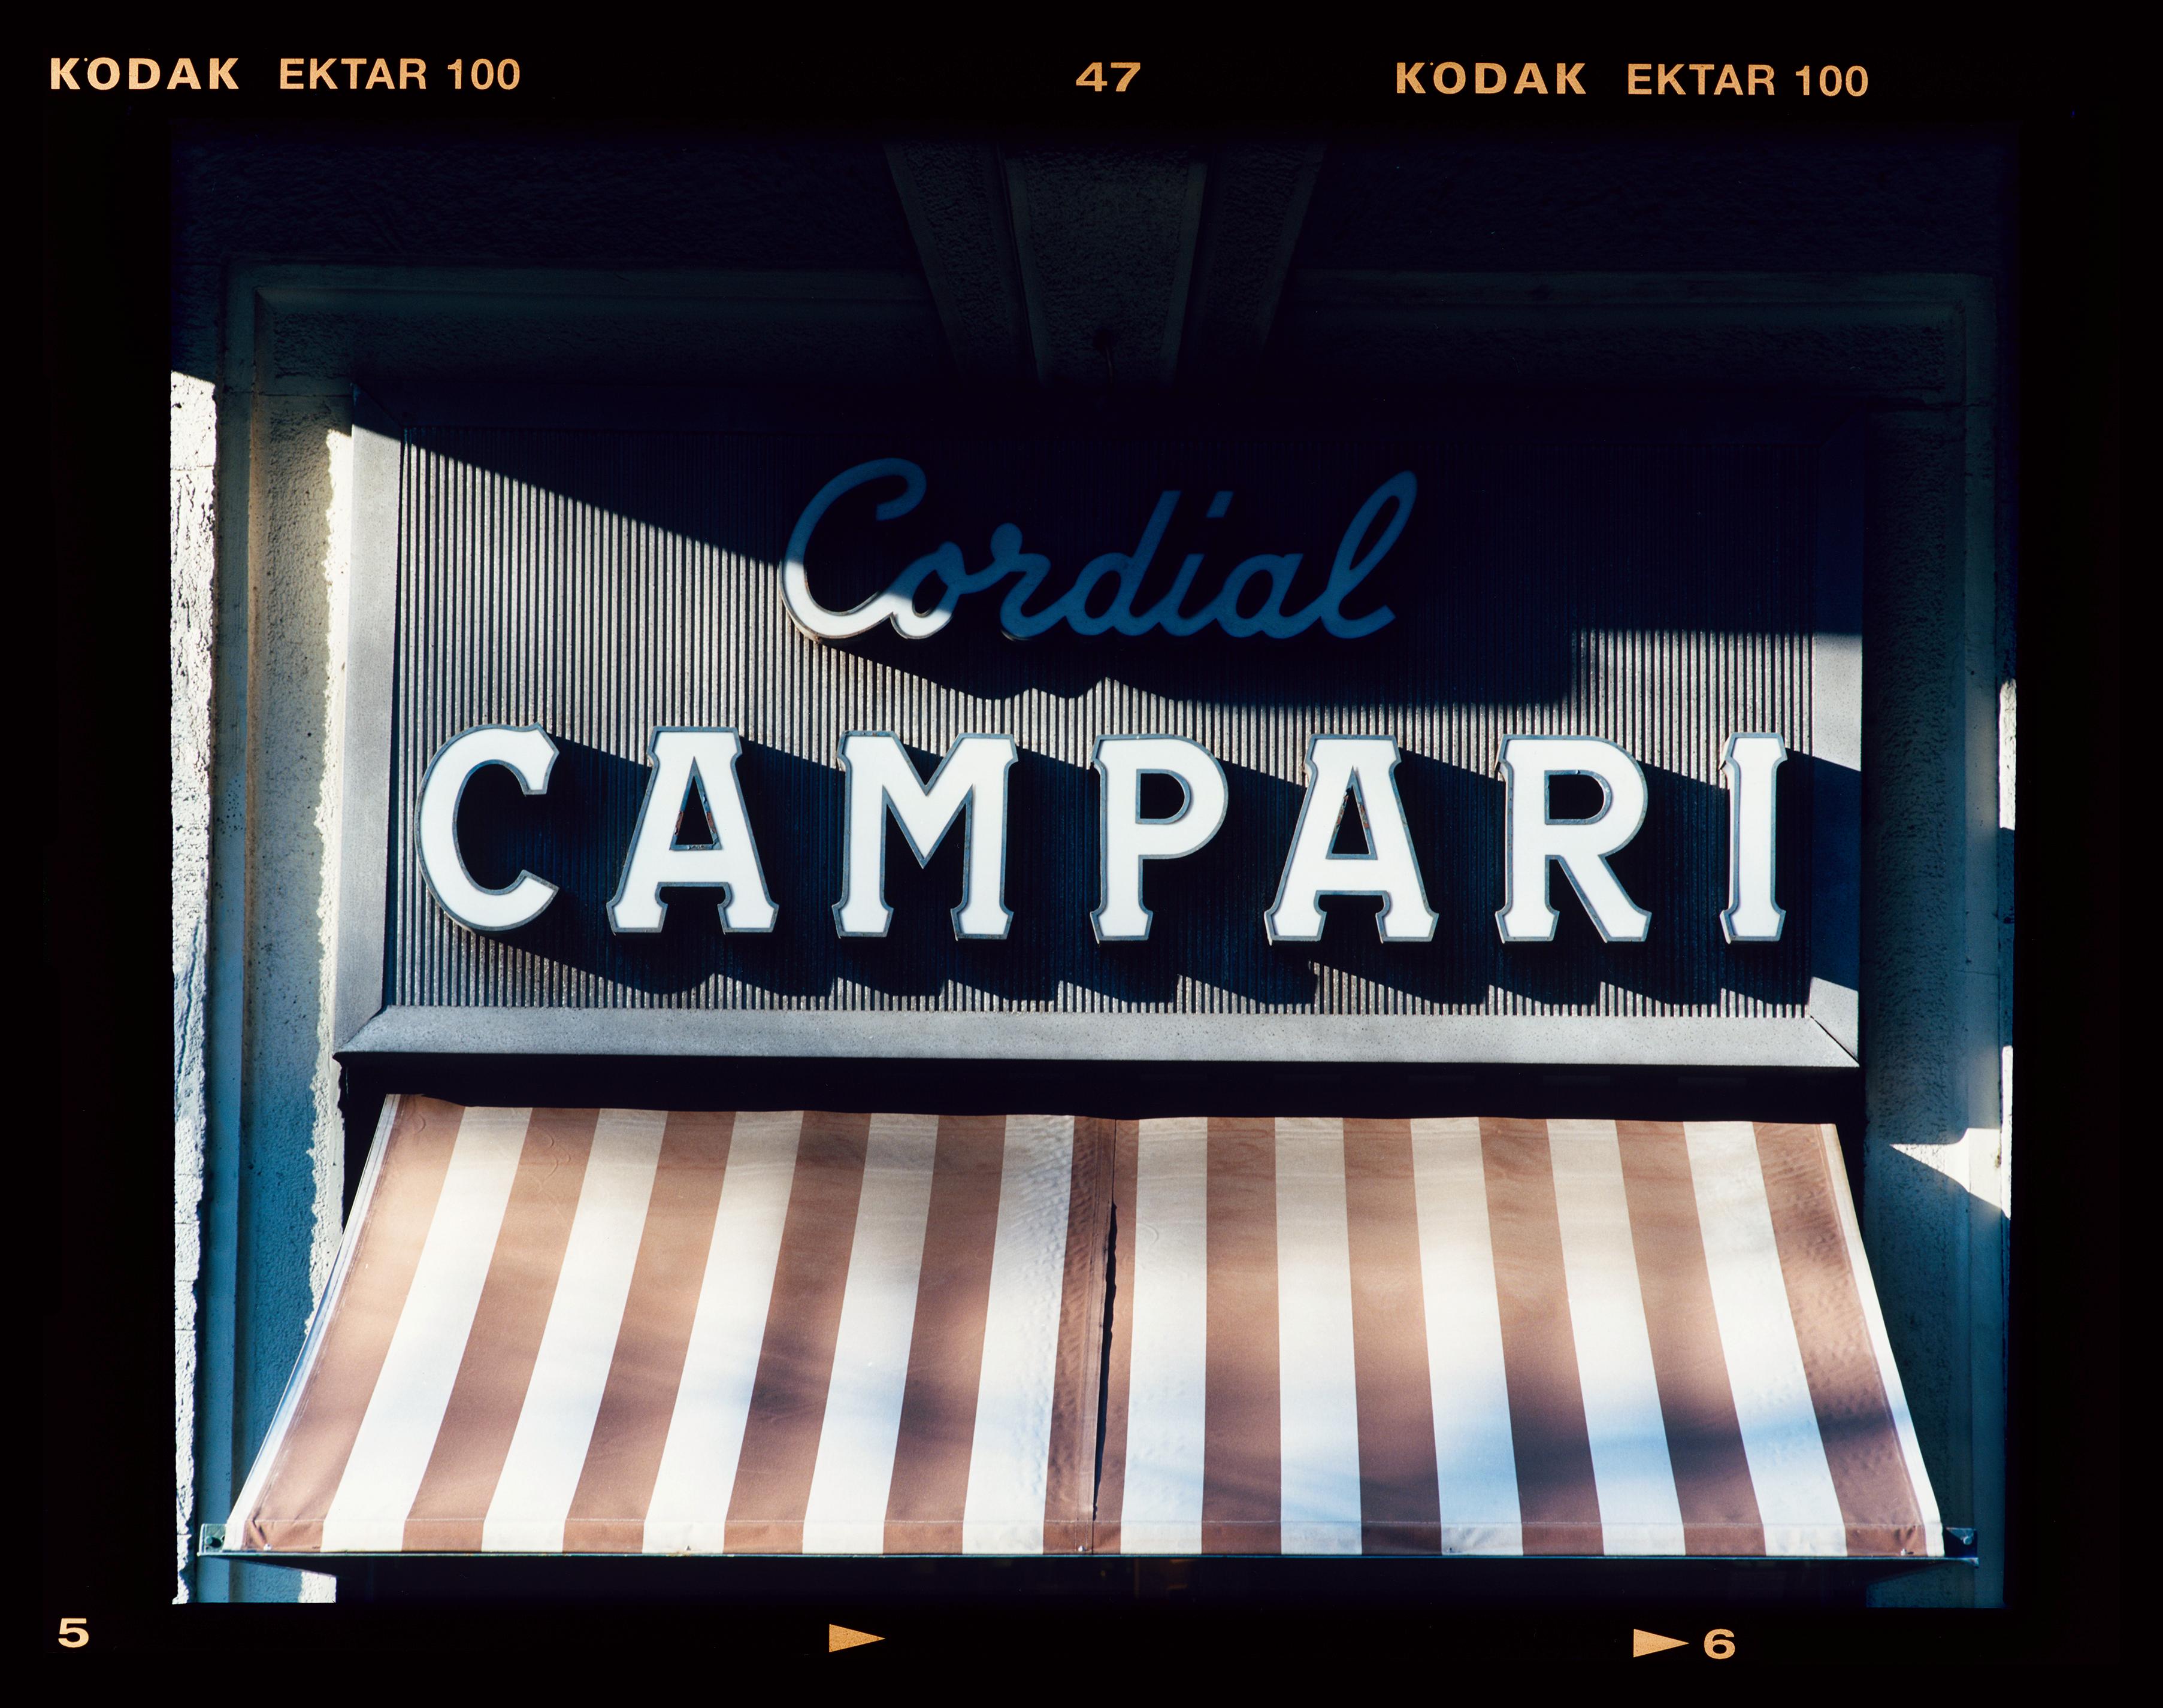 Cordial Campari, Italian street photograph from Richard Heeps series, A Short History of Milan.

There is a reoccurring linear, structural theme throughout the series, capturing the Milanese use of materials in design such as glass, metal, wood and